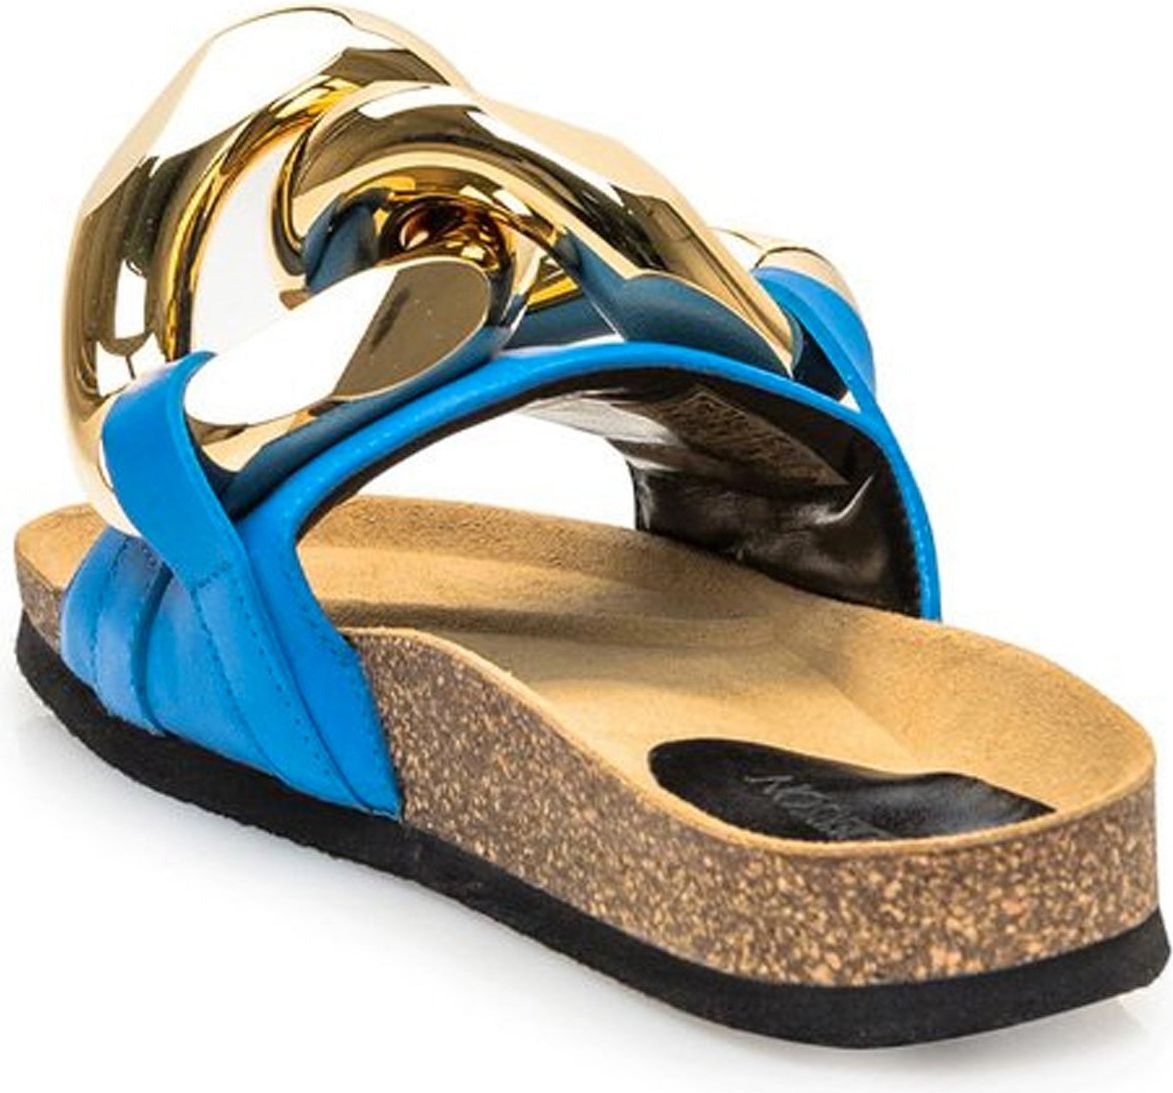 J.W. Anderson Jw Anderson Leather Flat Sandals Blauw